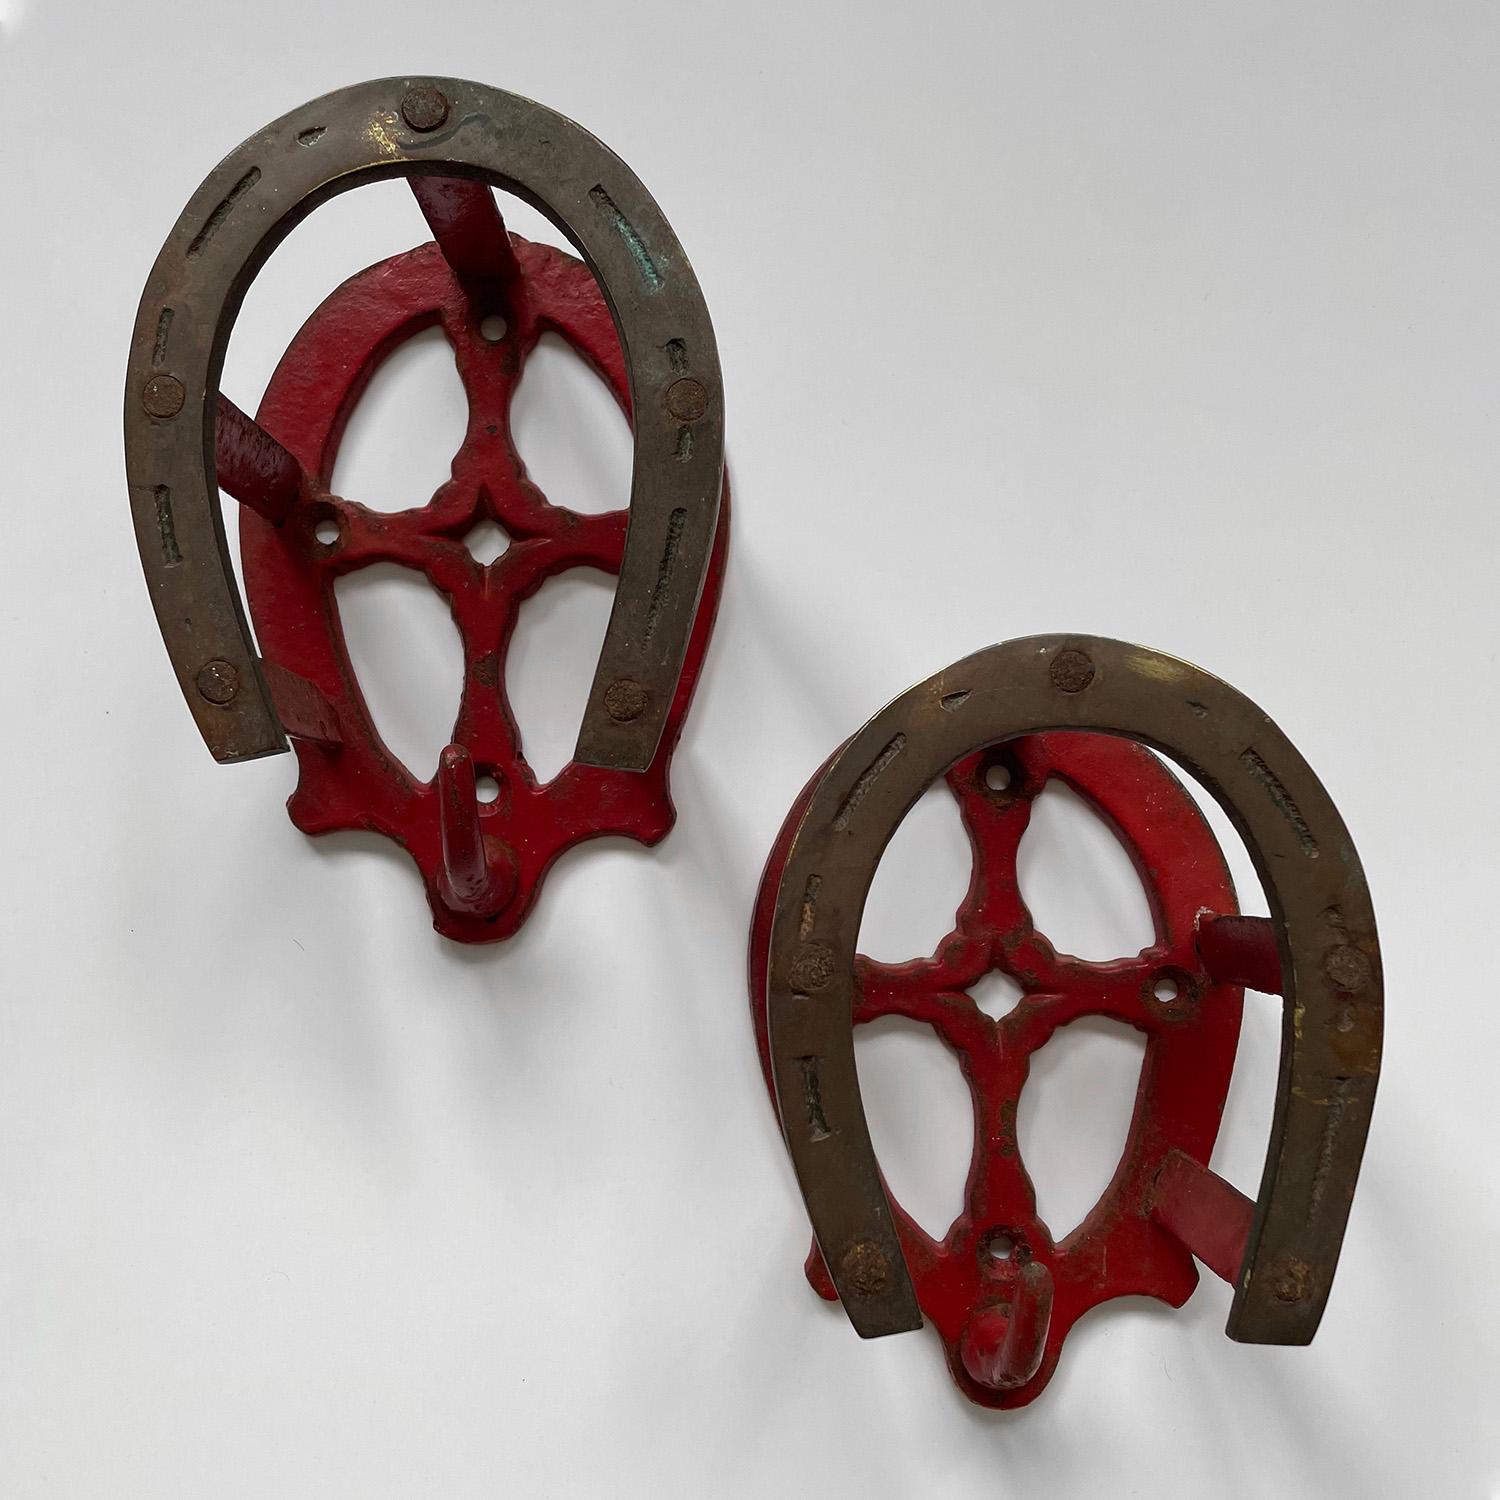 Pair of British equestrian wall hooks
England, early 20th century
Aged brass horseshoe hooks are wonderfully contrasted against the vibrant fire engine red paint
Heavy weight and durable, these hooks provide double storage
The upper portion